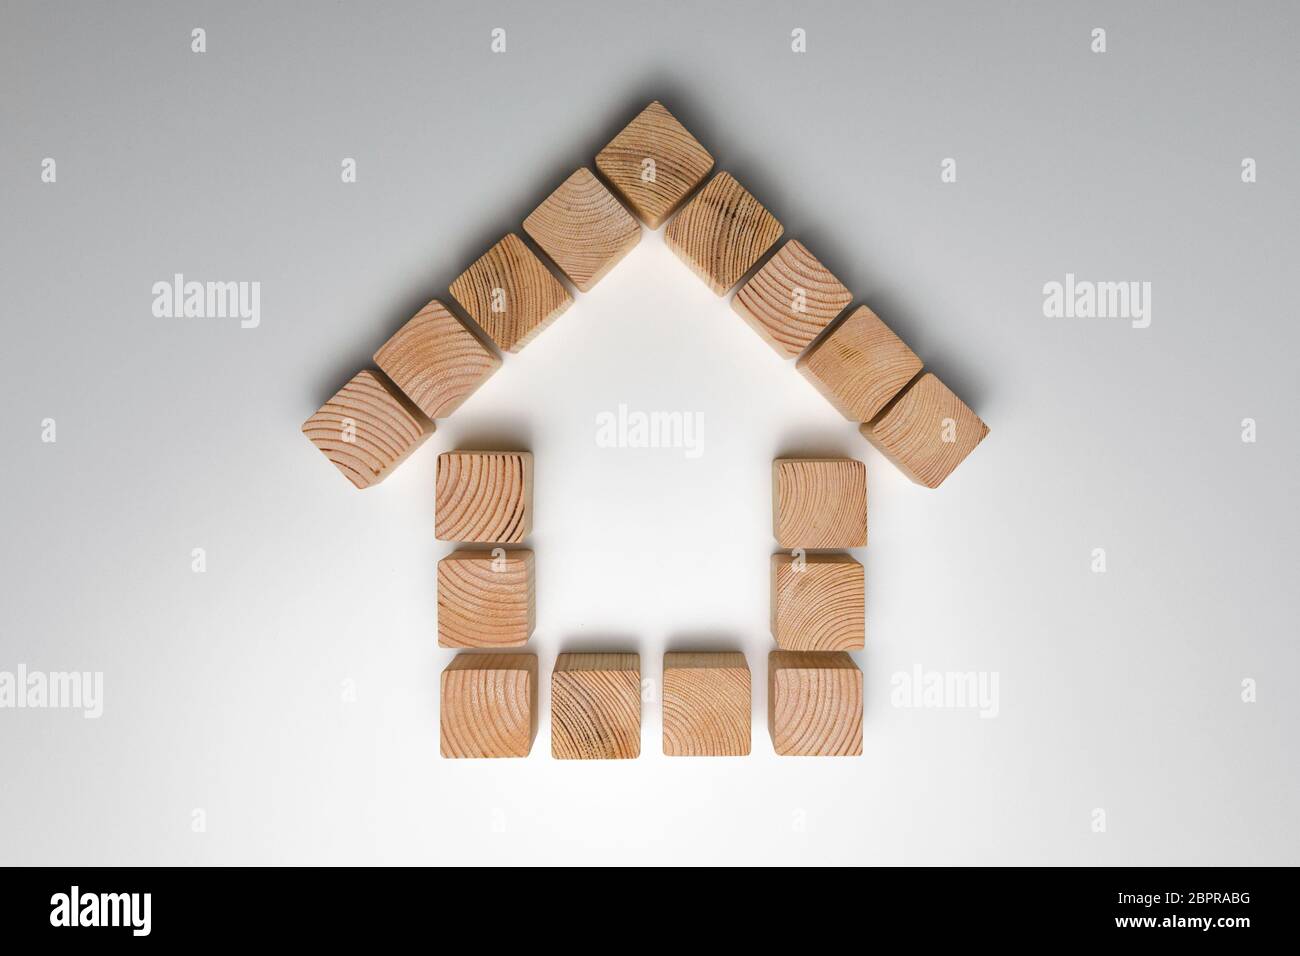 House of natural colored toy blocks on white background. House building concept Stock Photo